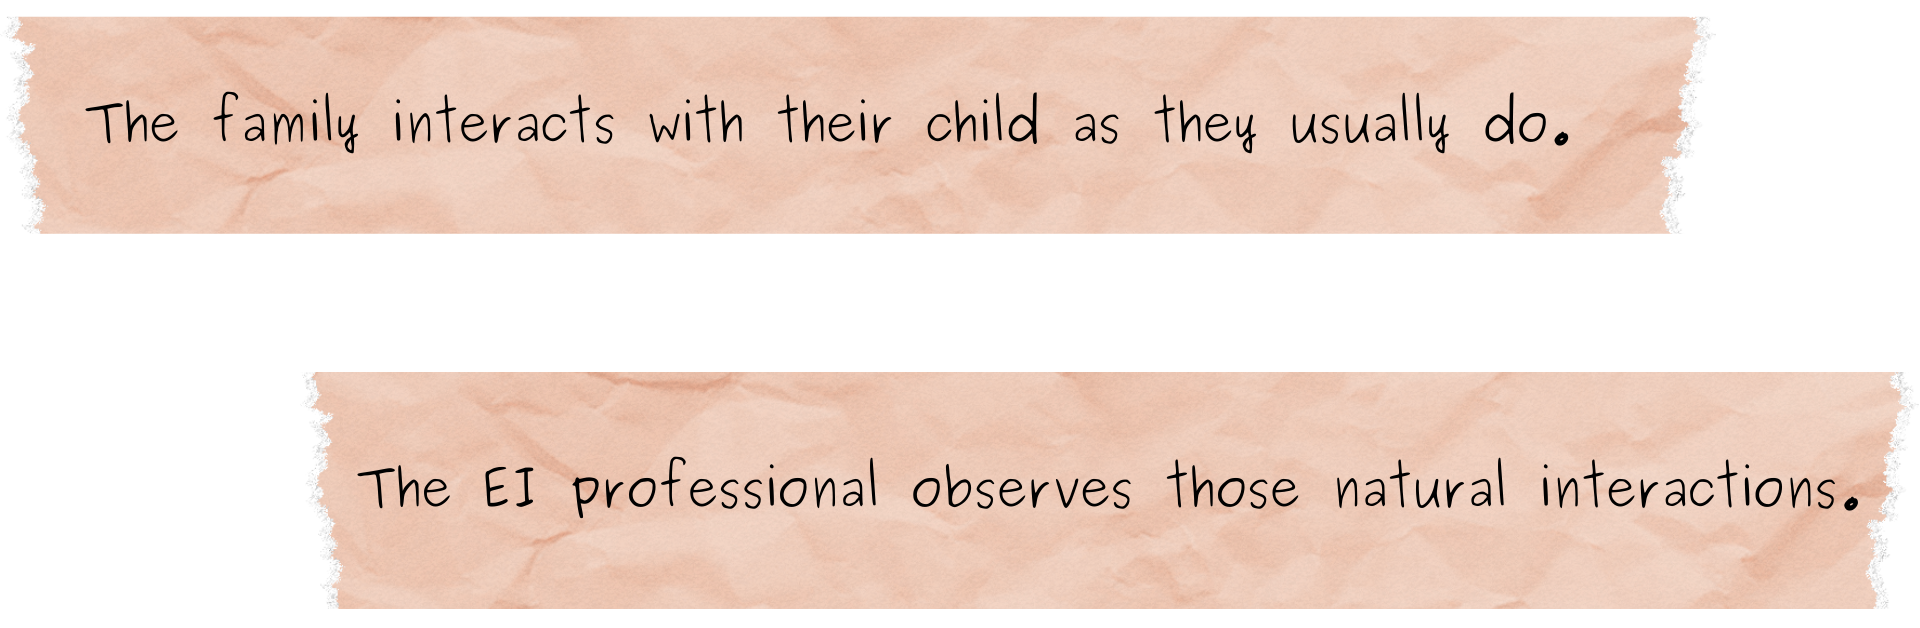 The family interacts with their child as they usually do. The EI professional observes those natural interactions.